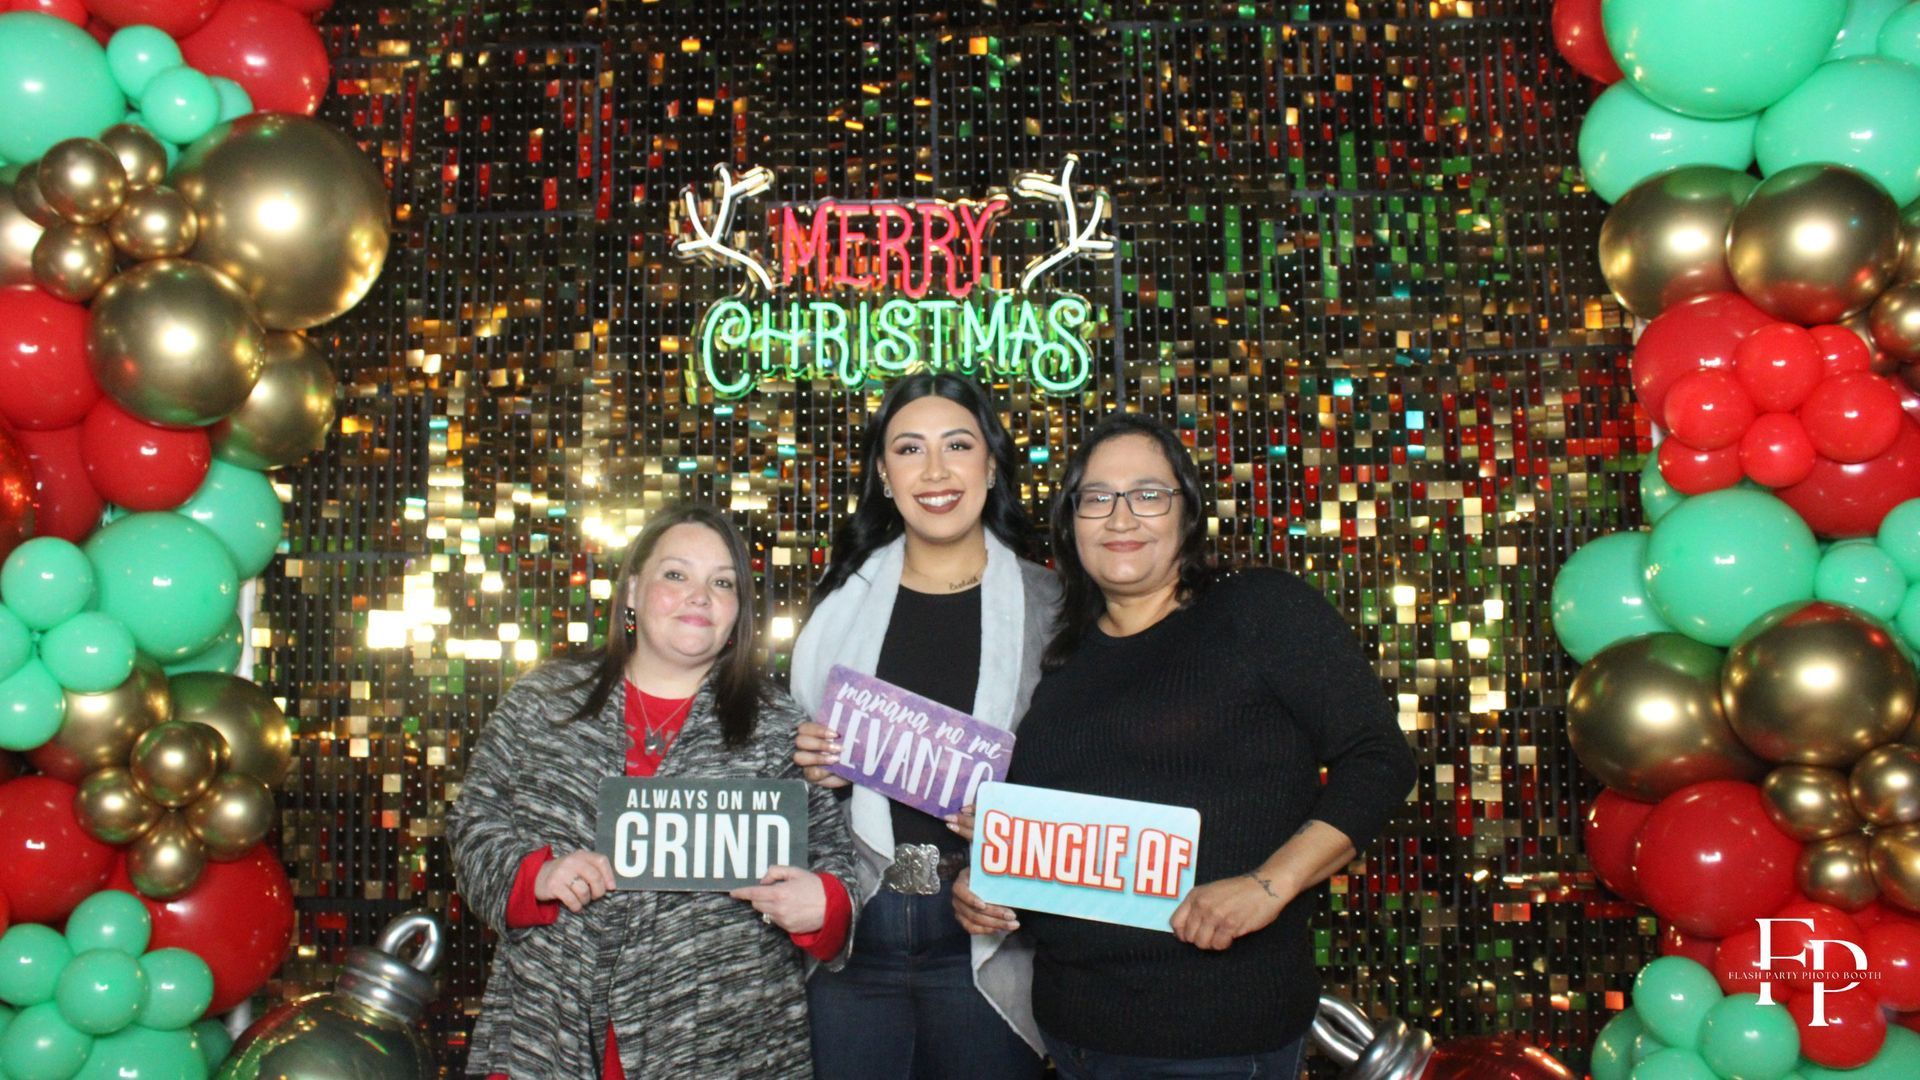 Three smiling women posing with a Christmas sign inside the Oval Mirror Photo Booth.